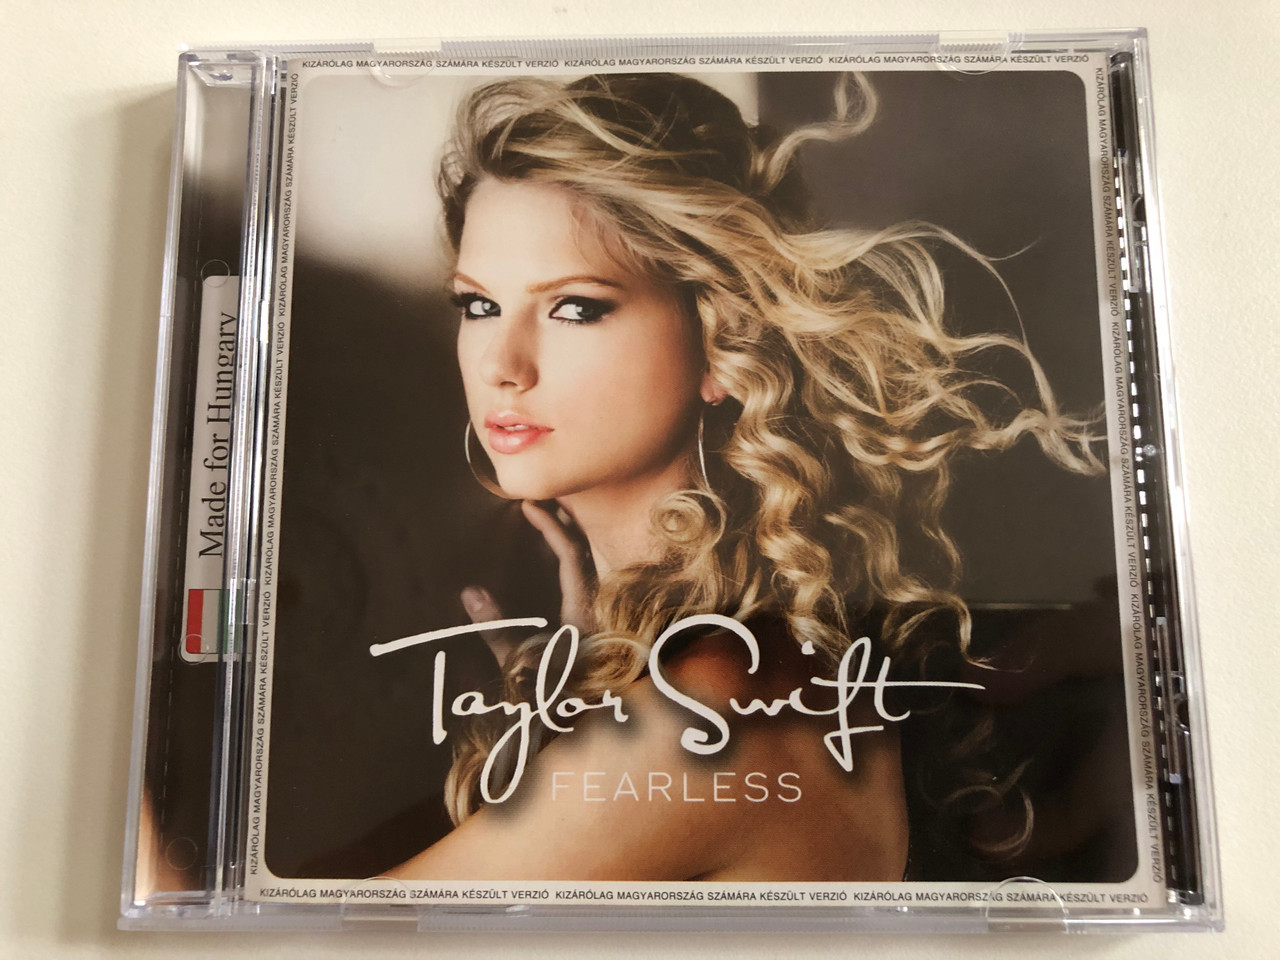 https://cdn11.bigcommerce.com/s-62bdpkt7pb/images/stencil/1280x1280/products/32292/189710/Taylor_Swift_Fearless_Made_For_Hungary_Big_Machine_Records_Audio_CD_2009_060251798410383__92371.1630435434.JPG?c=2